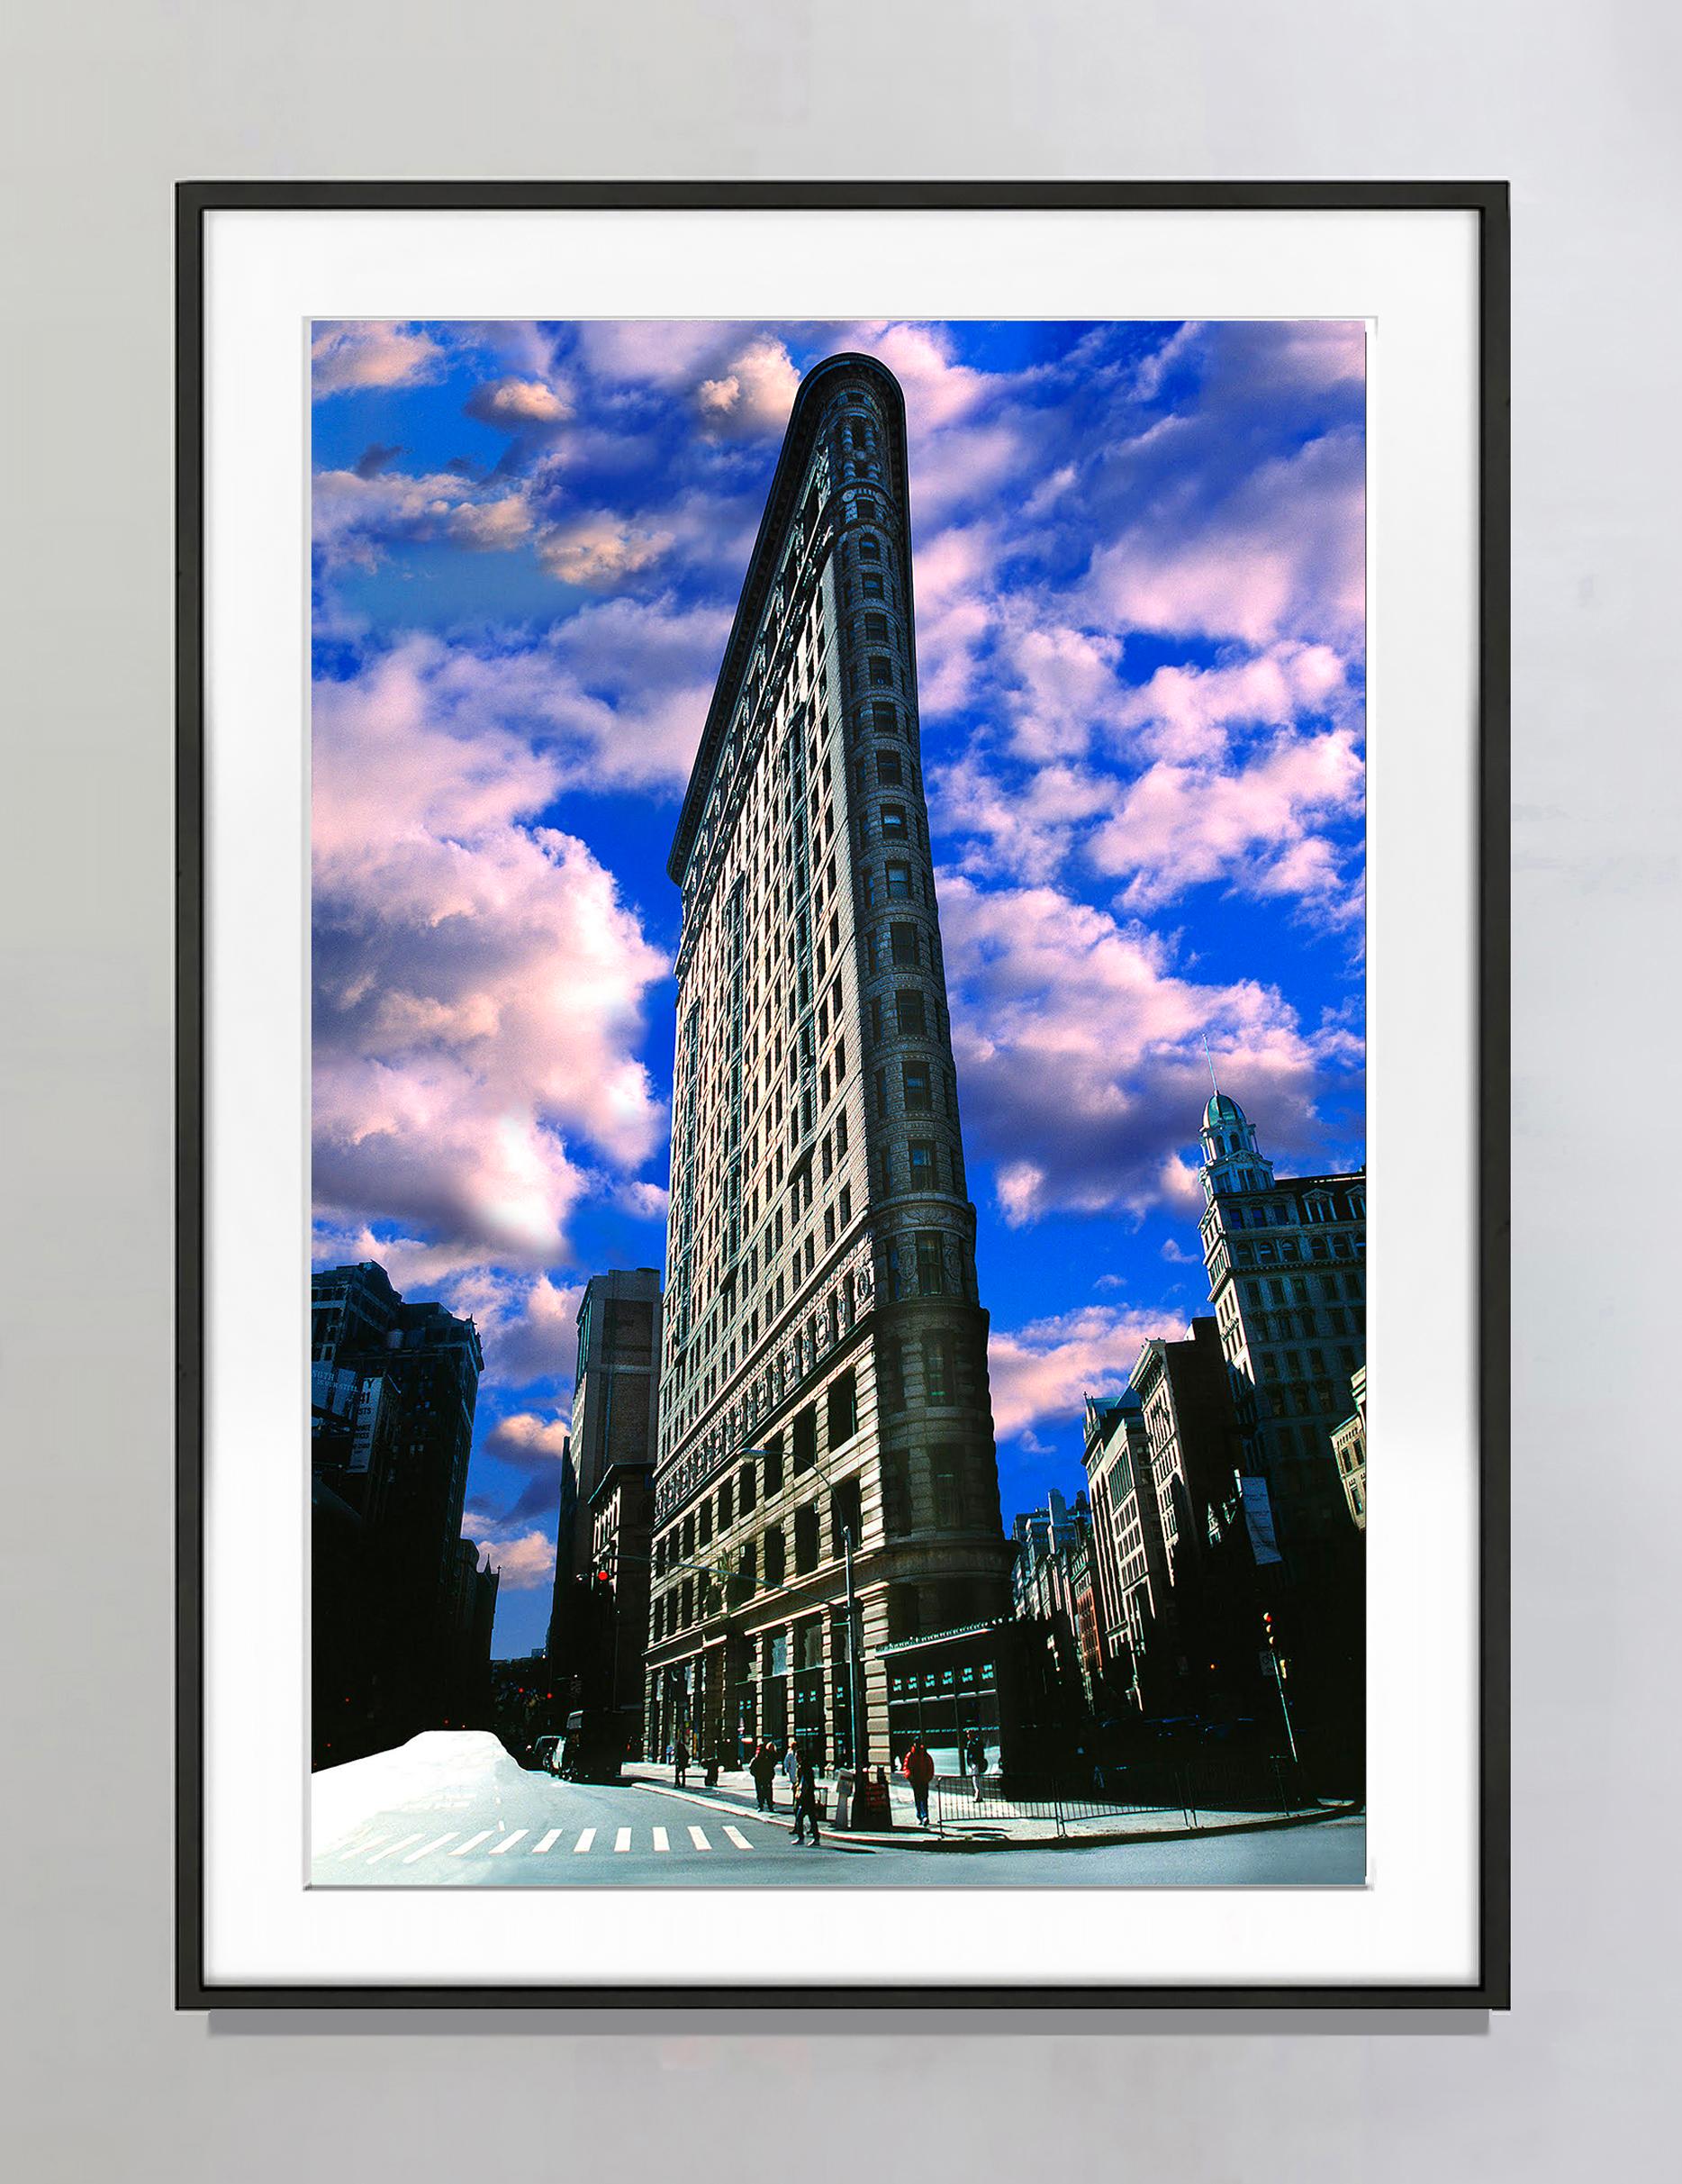 Flatiron Building New York's First Skyscraper in  Heroic Depiction, Architecture - Photograph by Mitchell Funk